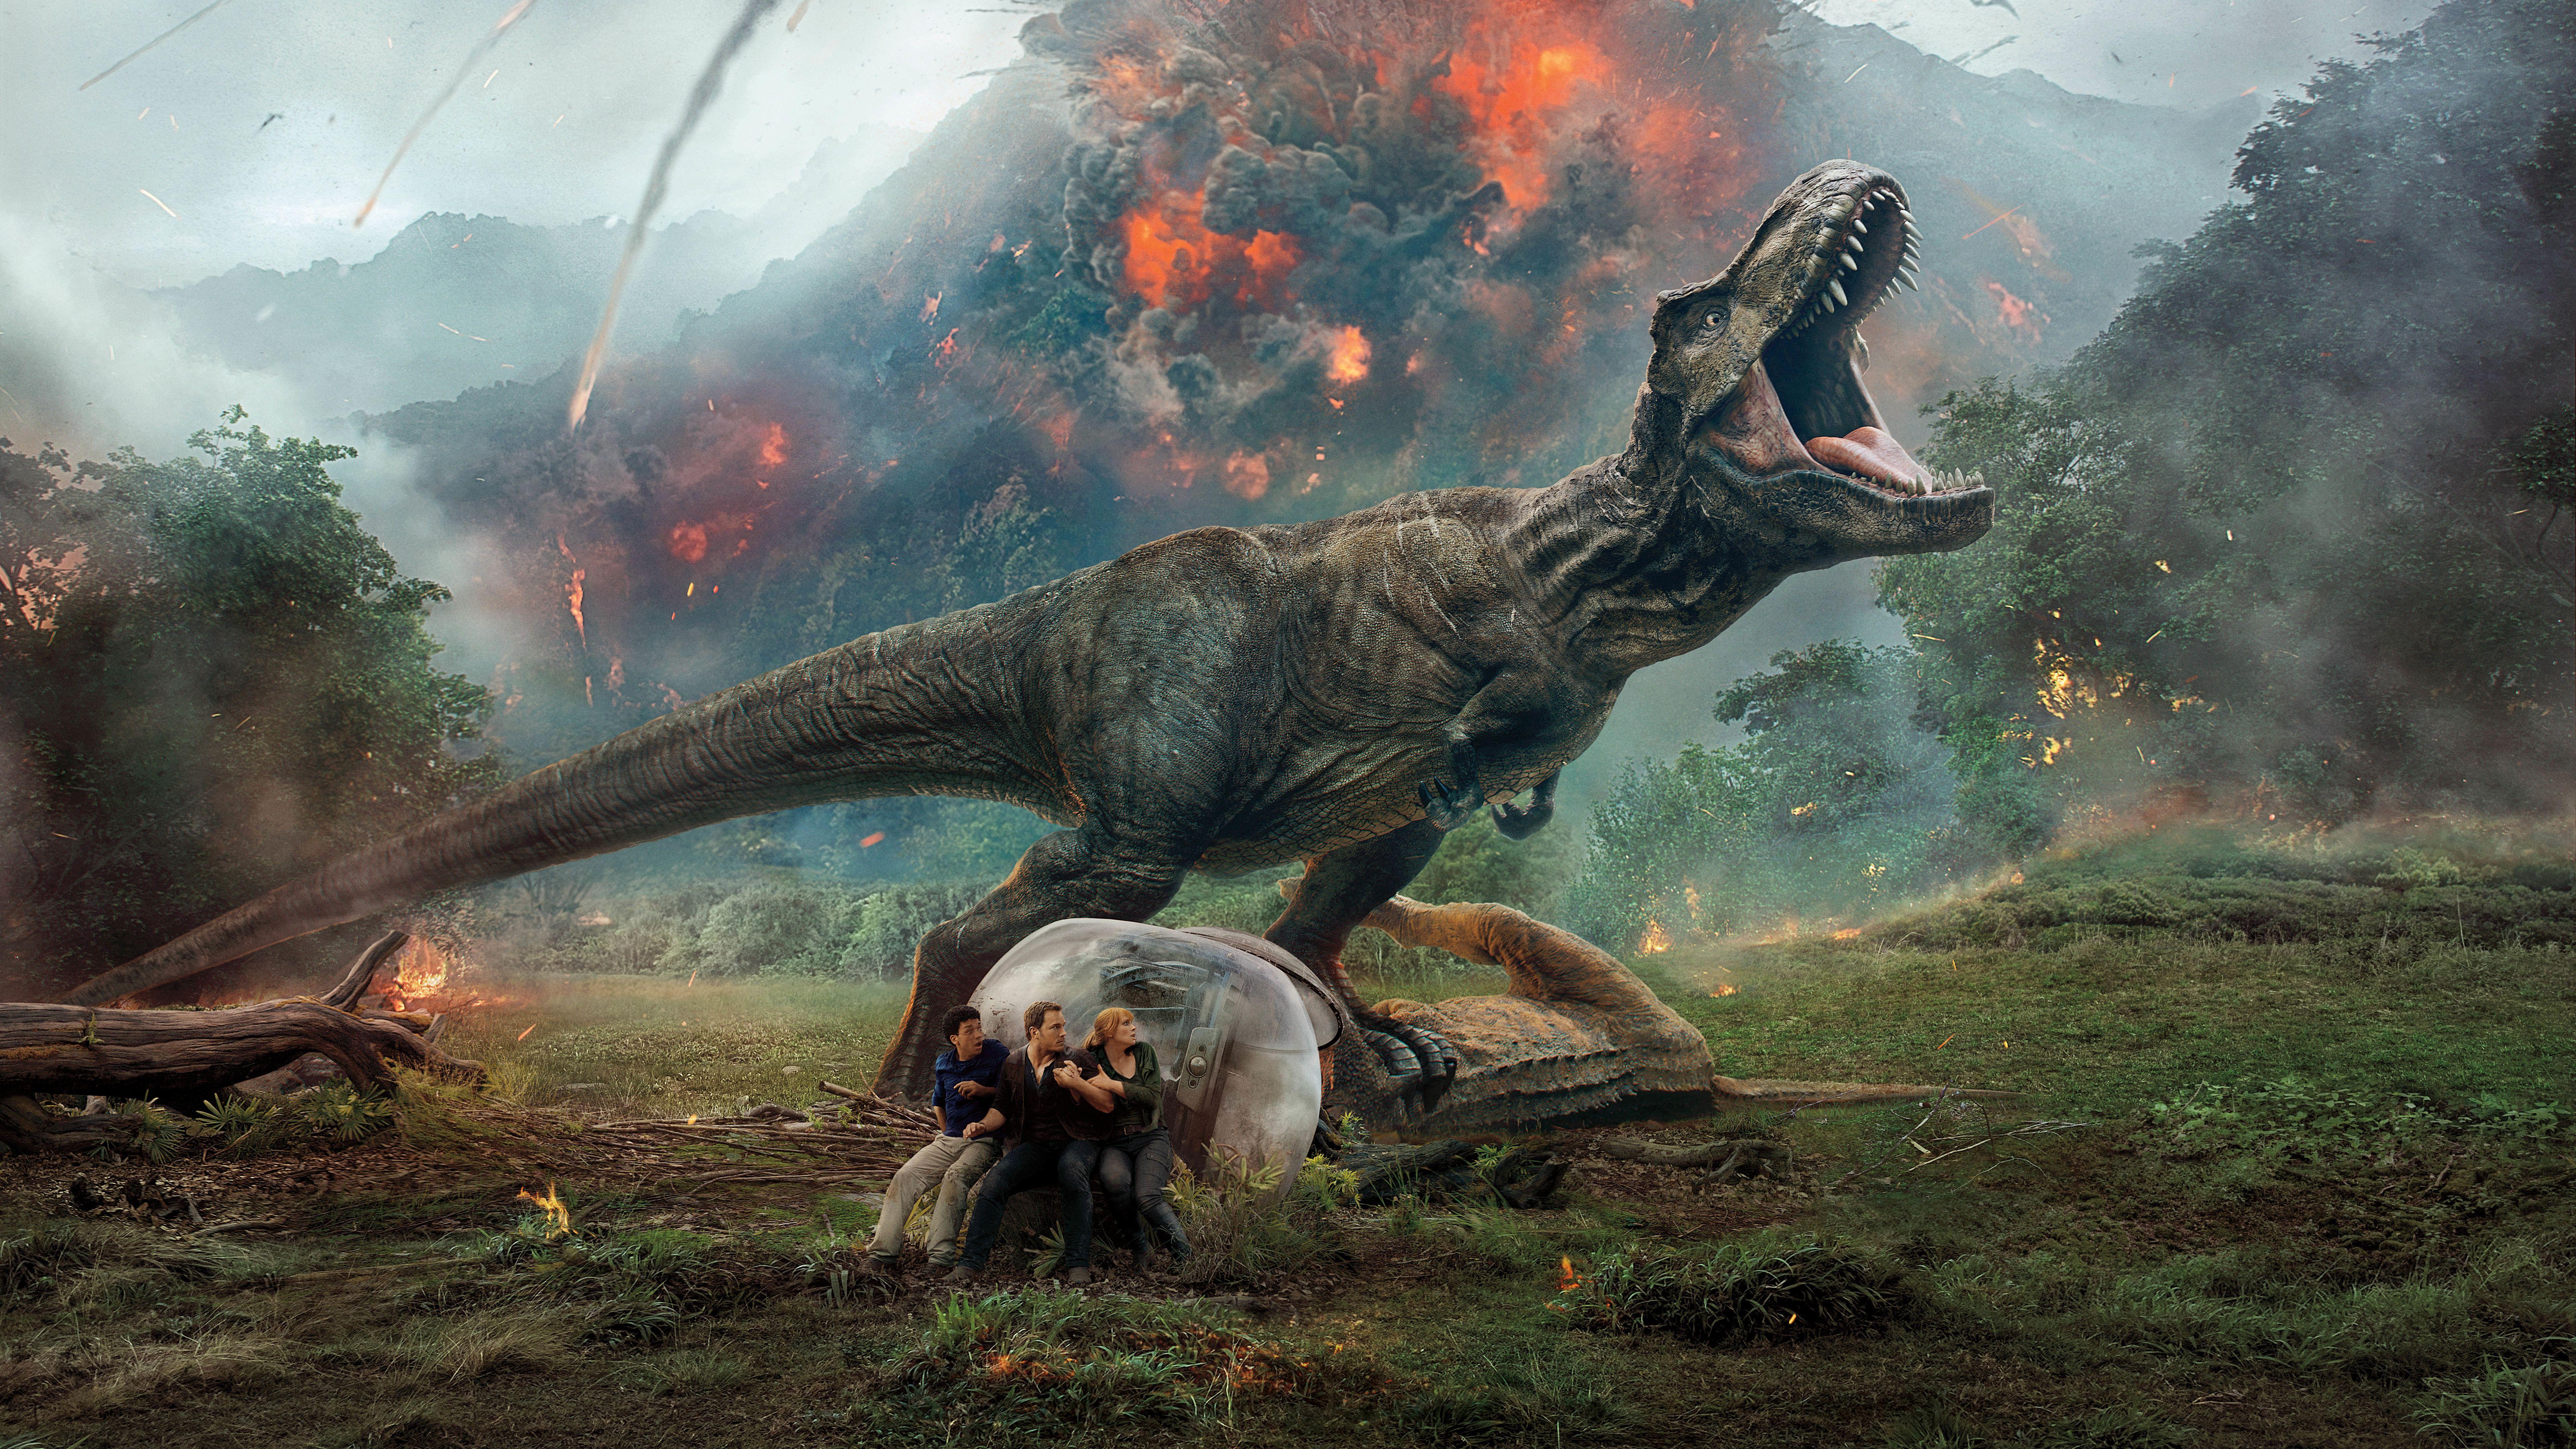 Dinosaurs Tyrannosaurus Rex Lost World Of Animals From The Past Hd Wallpaper   Wallpapers13com